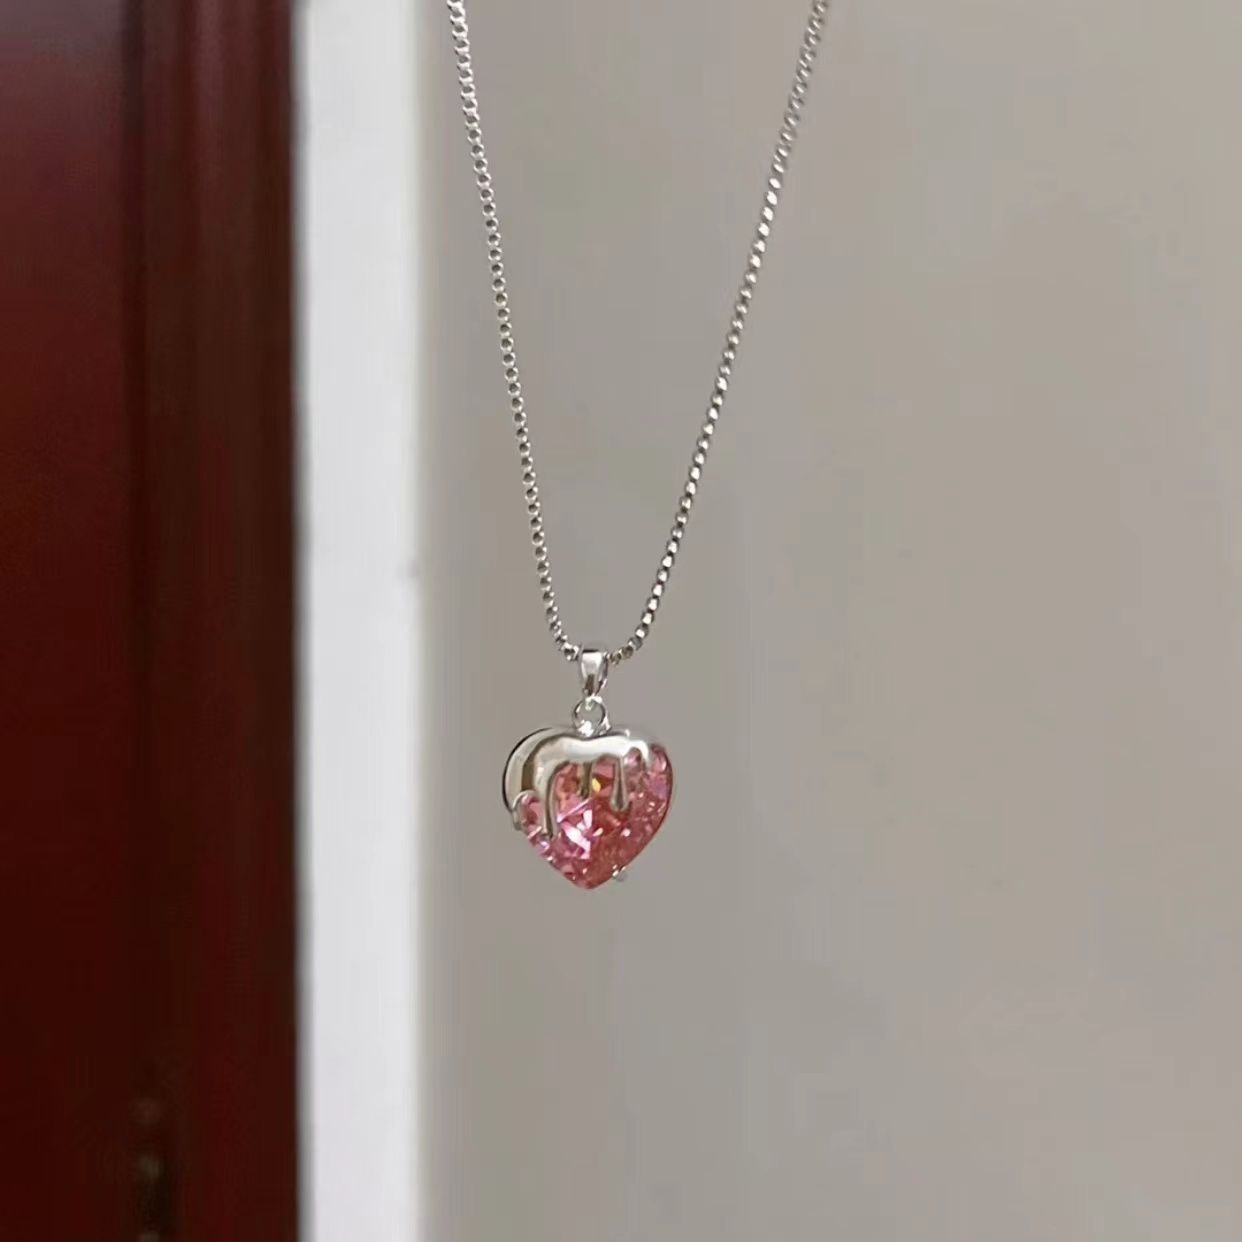 Strawberry Sweetheart Necklace Susan